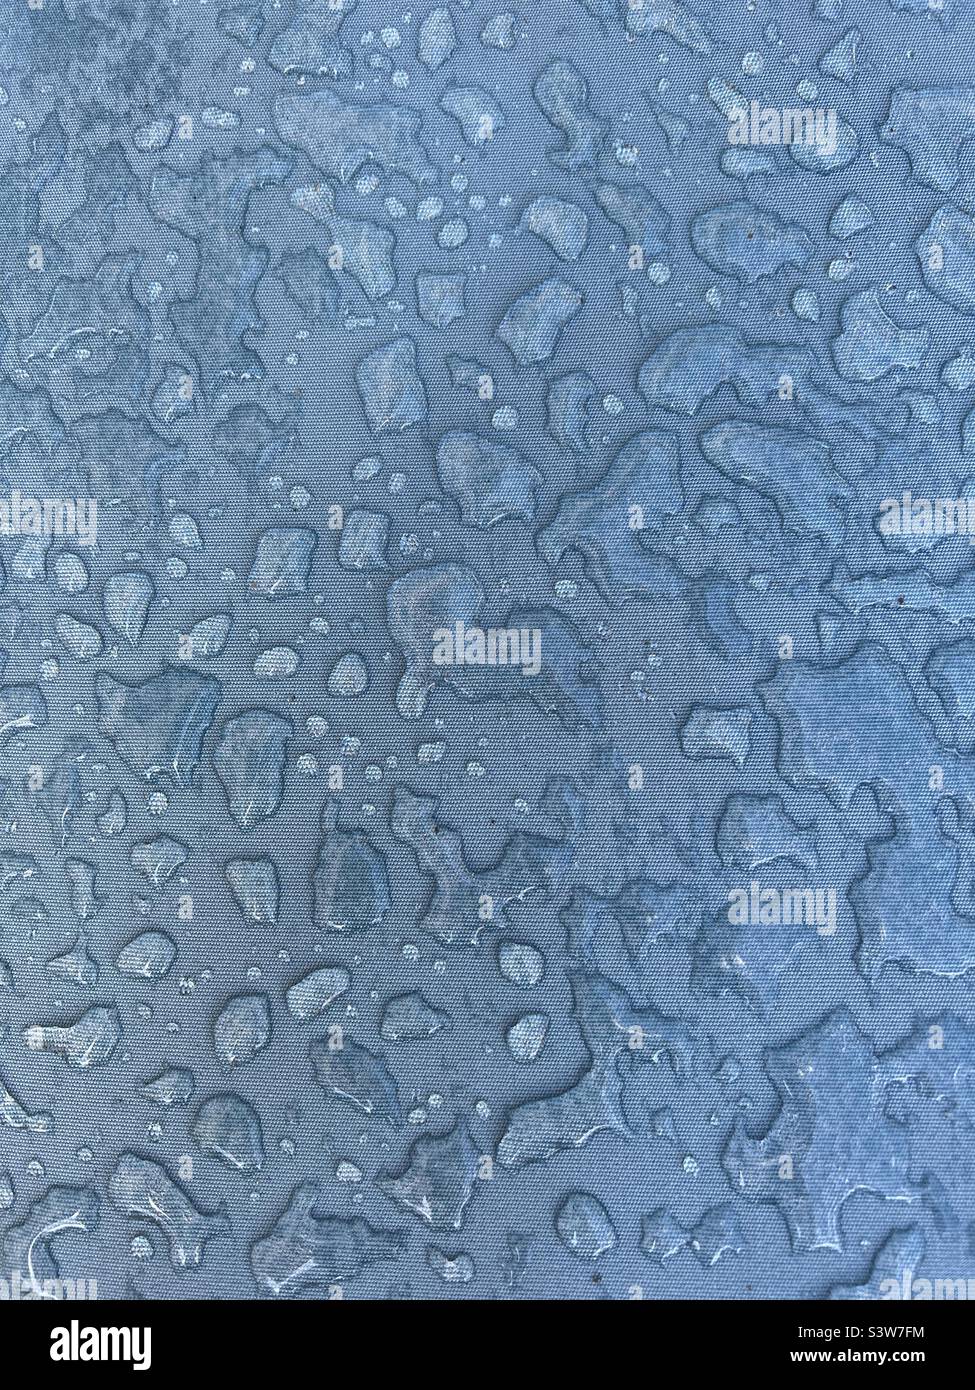 Abstract background of water droplets on blue background Stock Photo